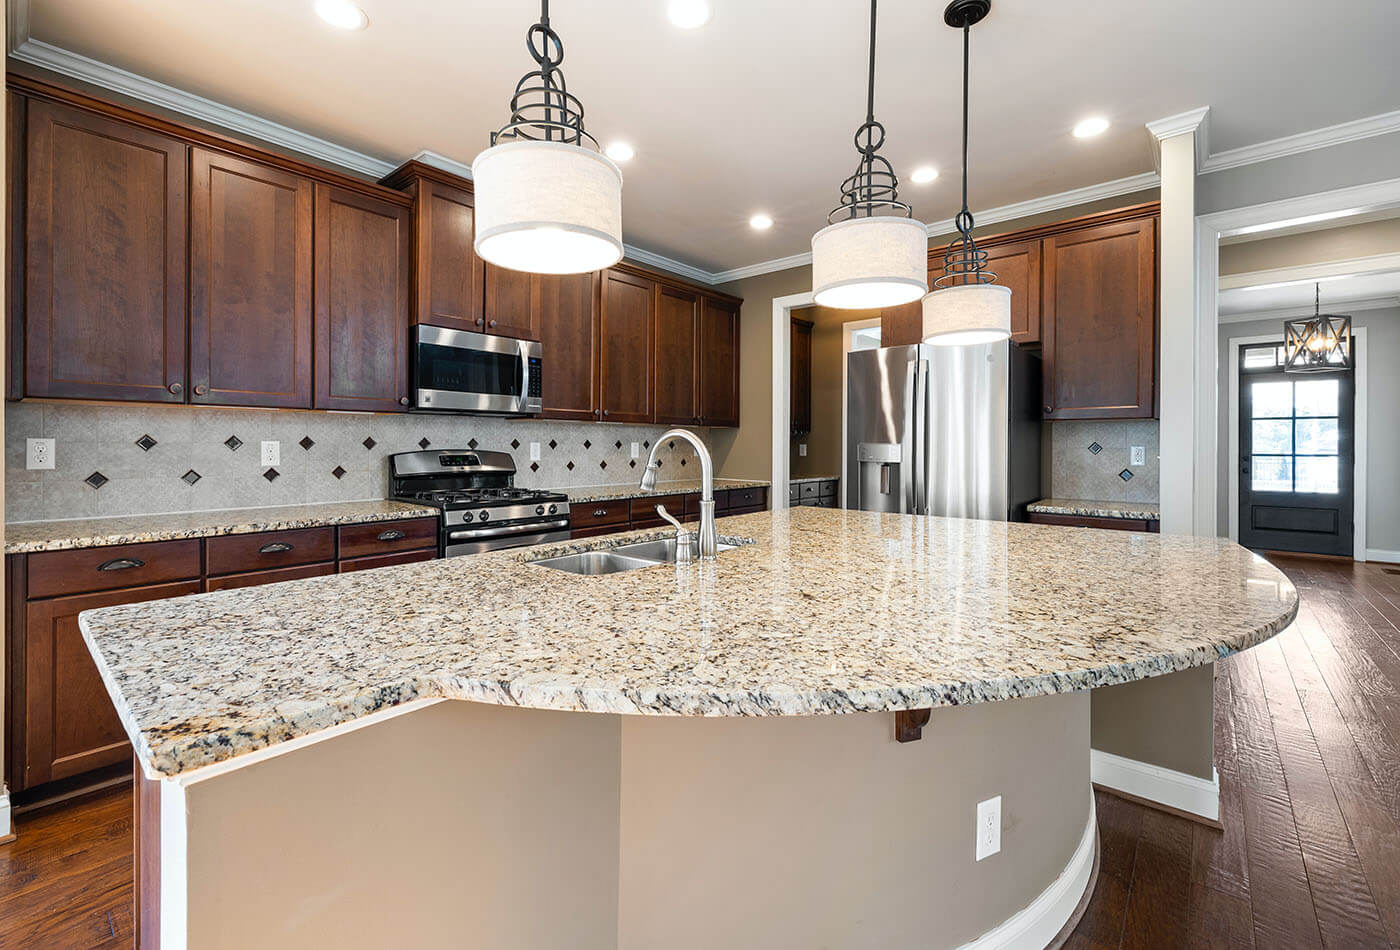 countertops and kitchen